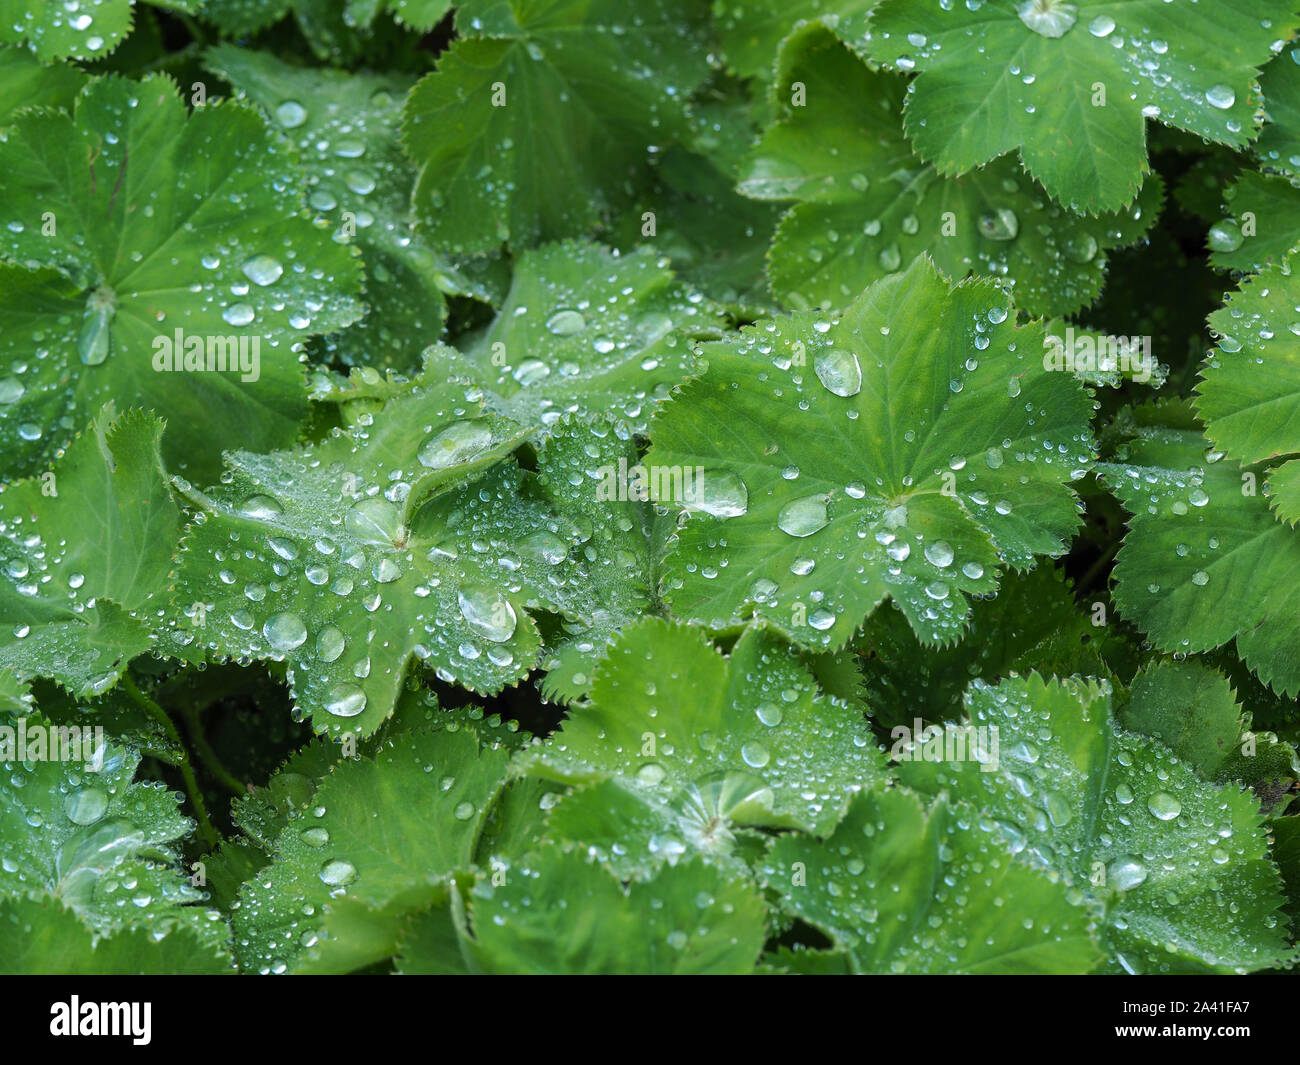 Green leaves of a geranium plant in a garden with water droplets from a rain shower Stock Photo